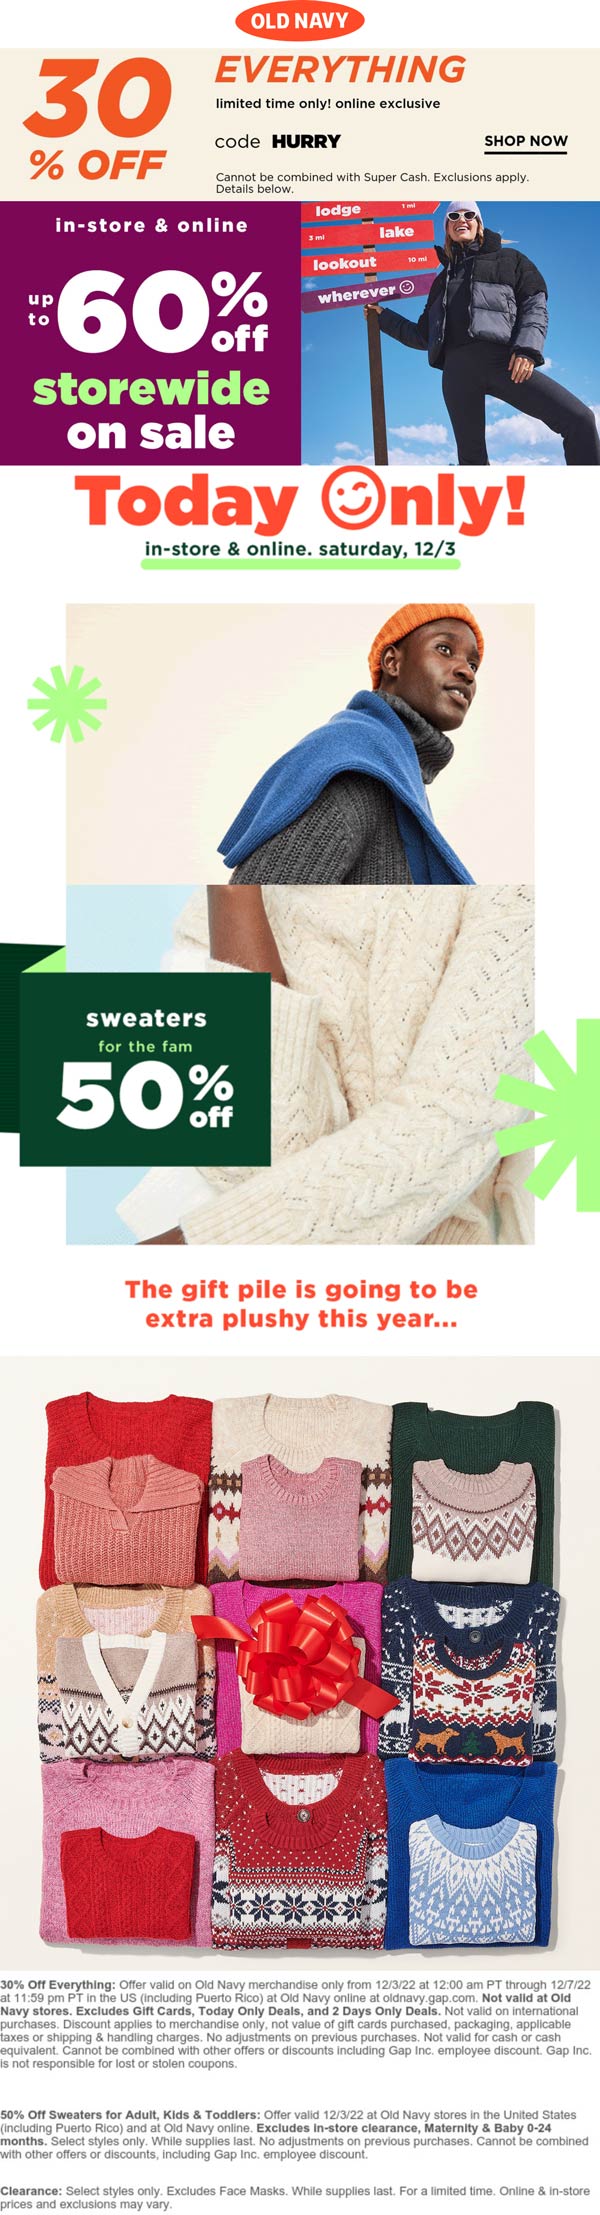 Old Navy stores Coupon  30% off everything online & more at Old Navy via promo code HURRY #oldnavy 